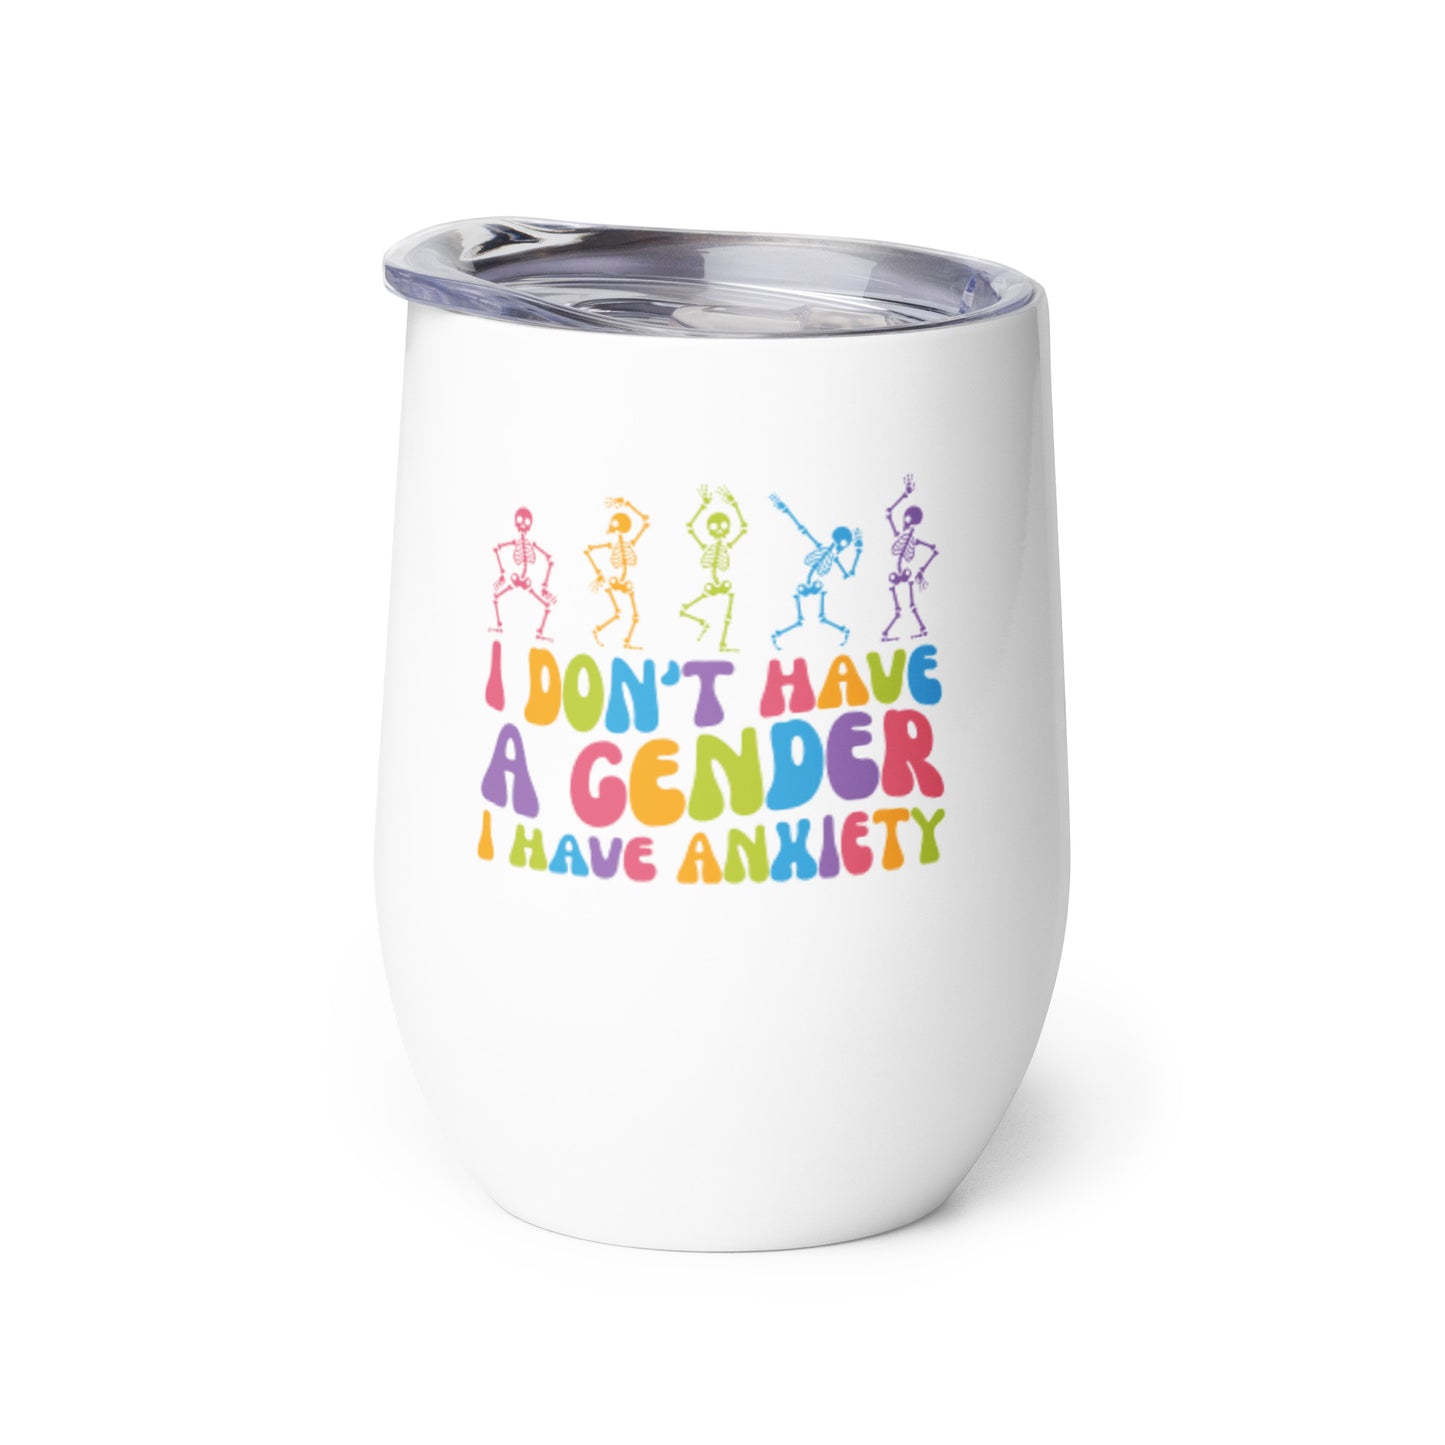 I Don't Have a Gender I Have Anxiety Wine Tumbler - gay pride apparel